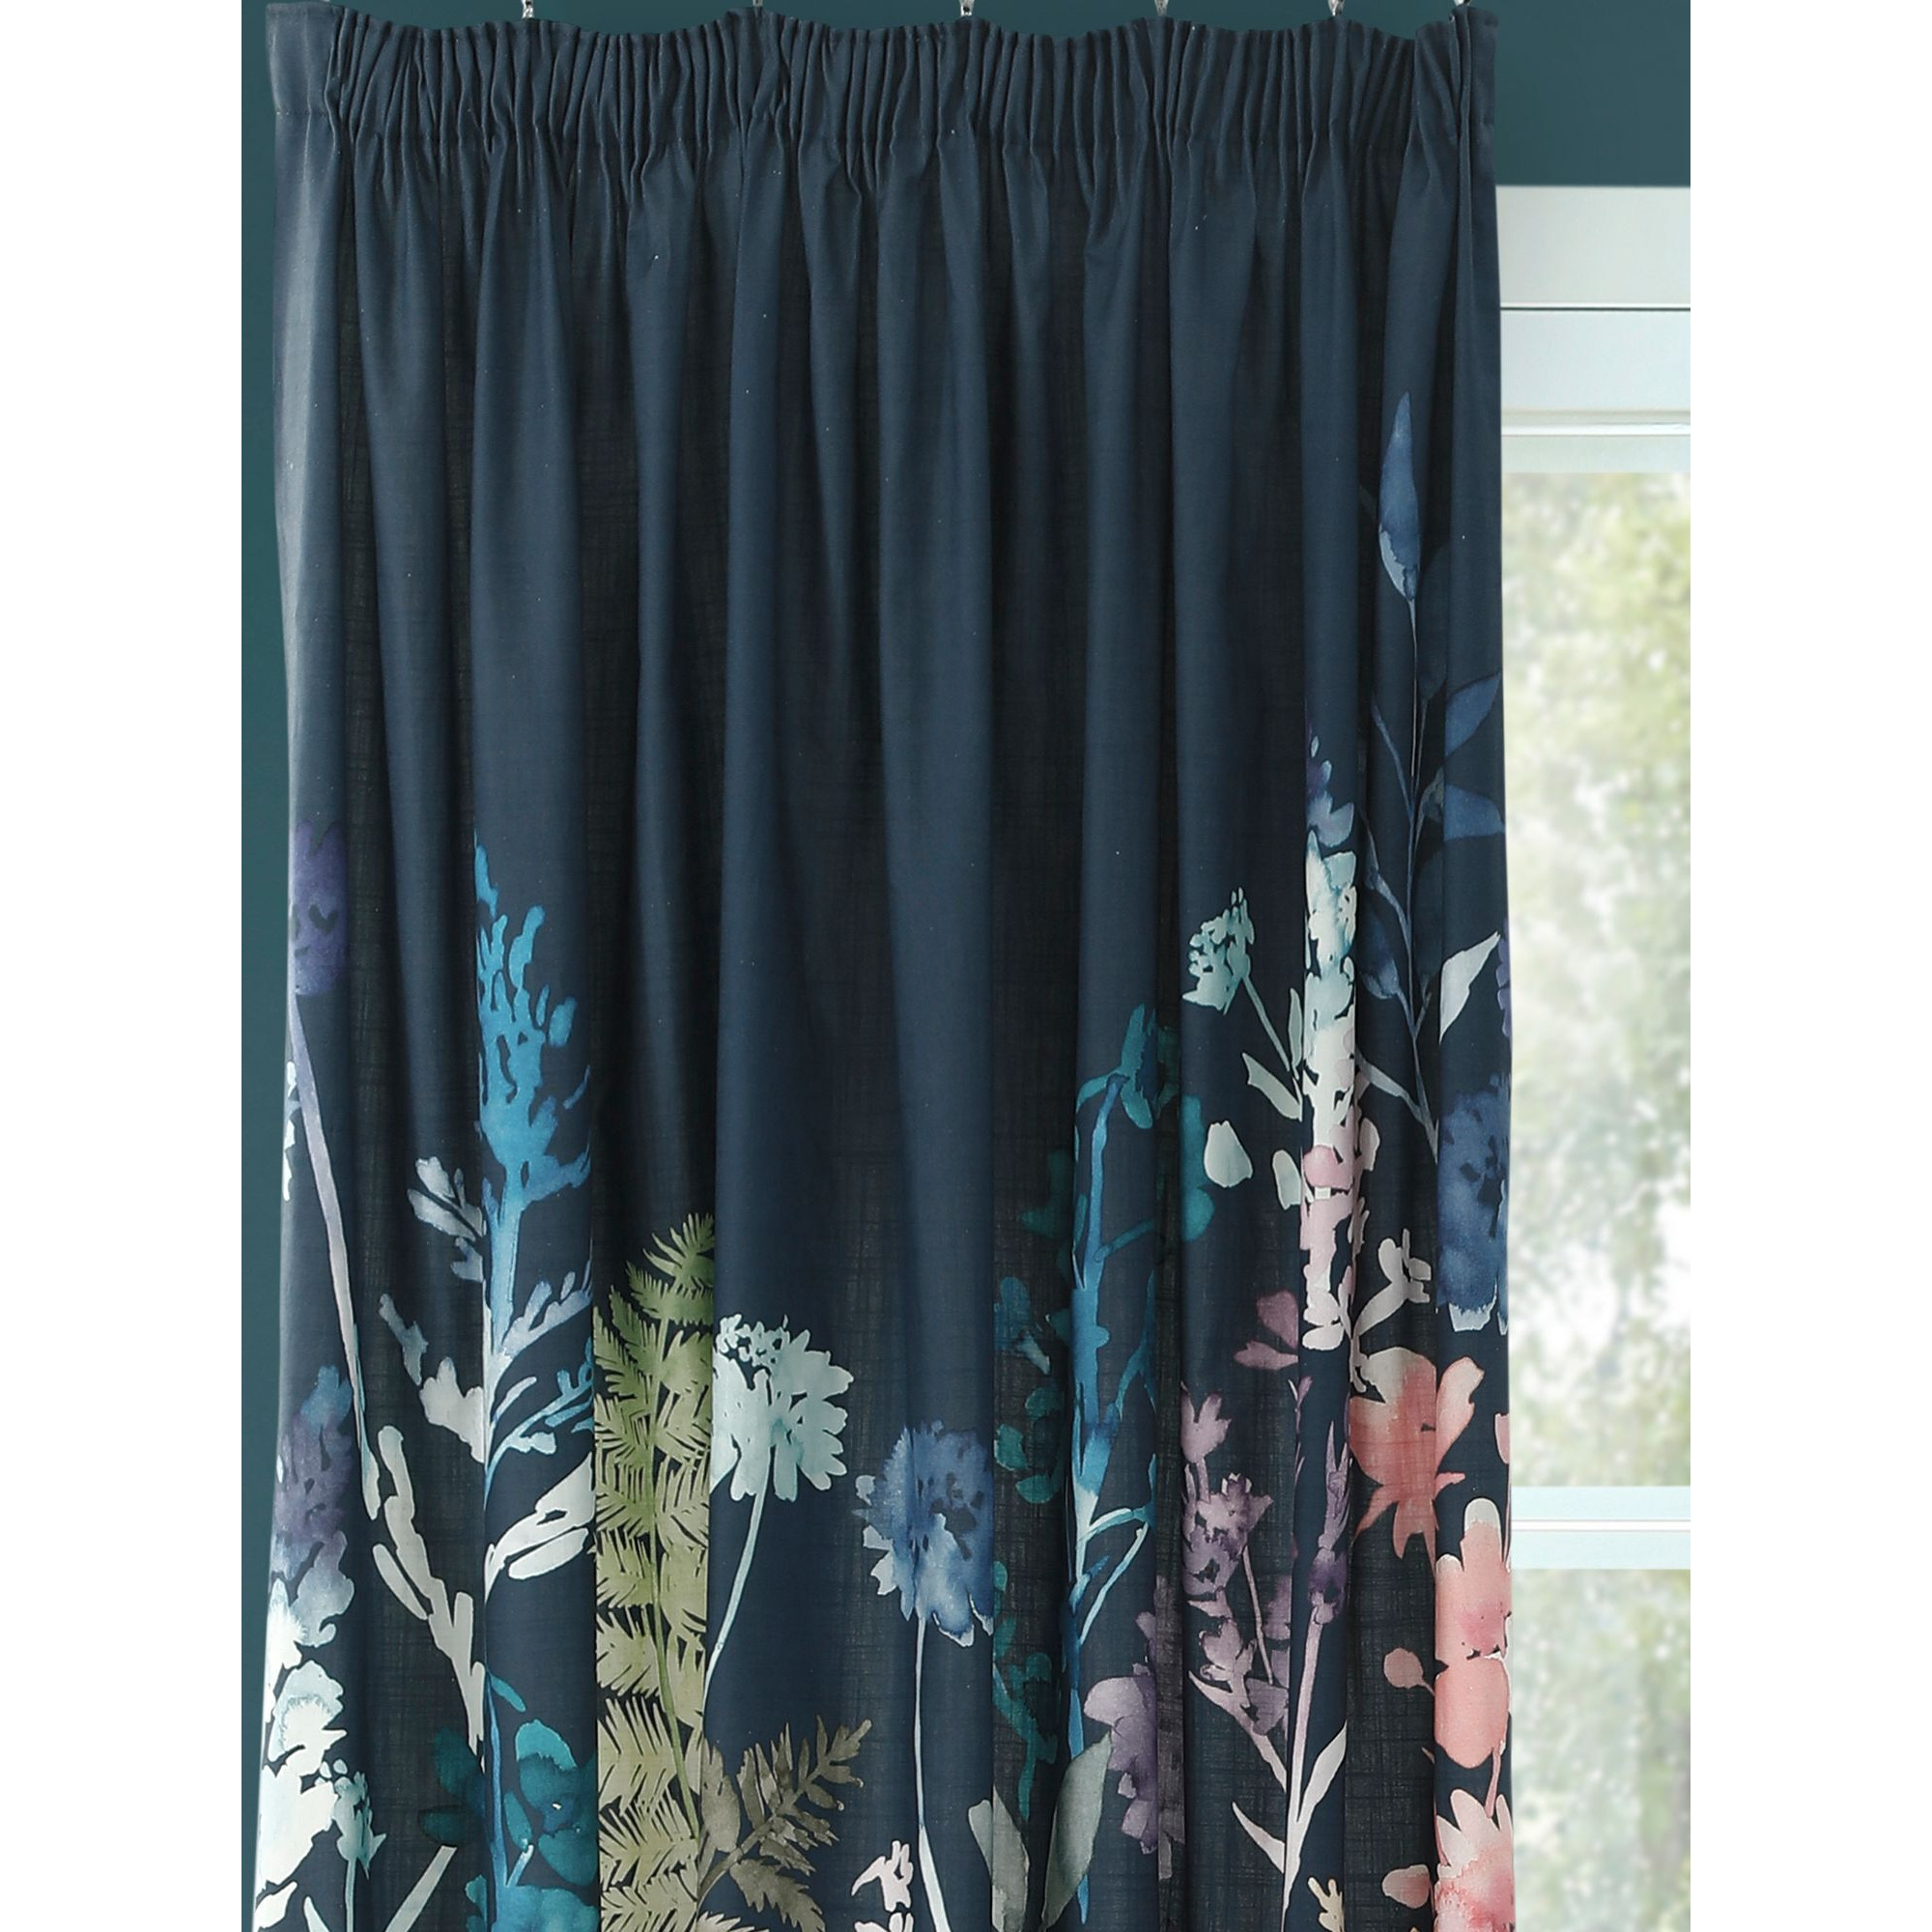 bluebellgray Peggy Pair Lined Pencil Pleat Curtains - image 1